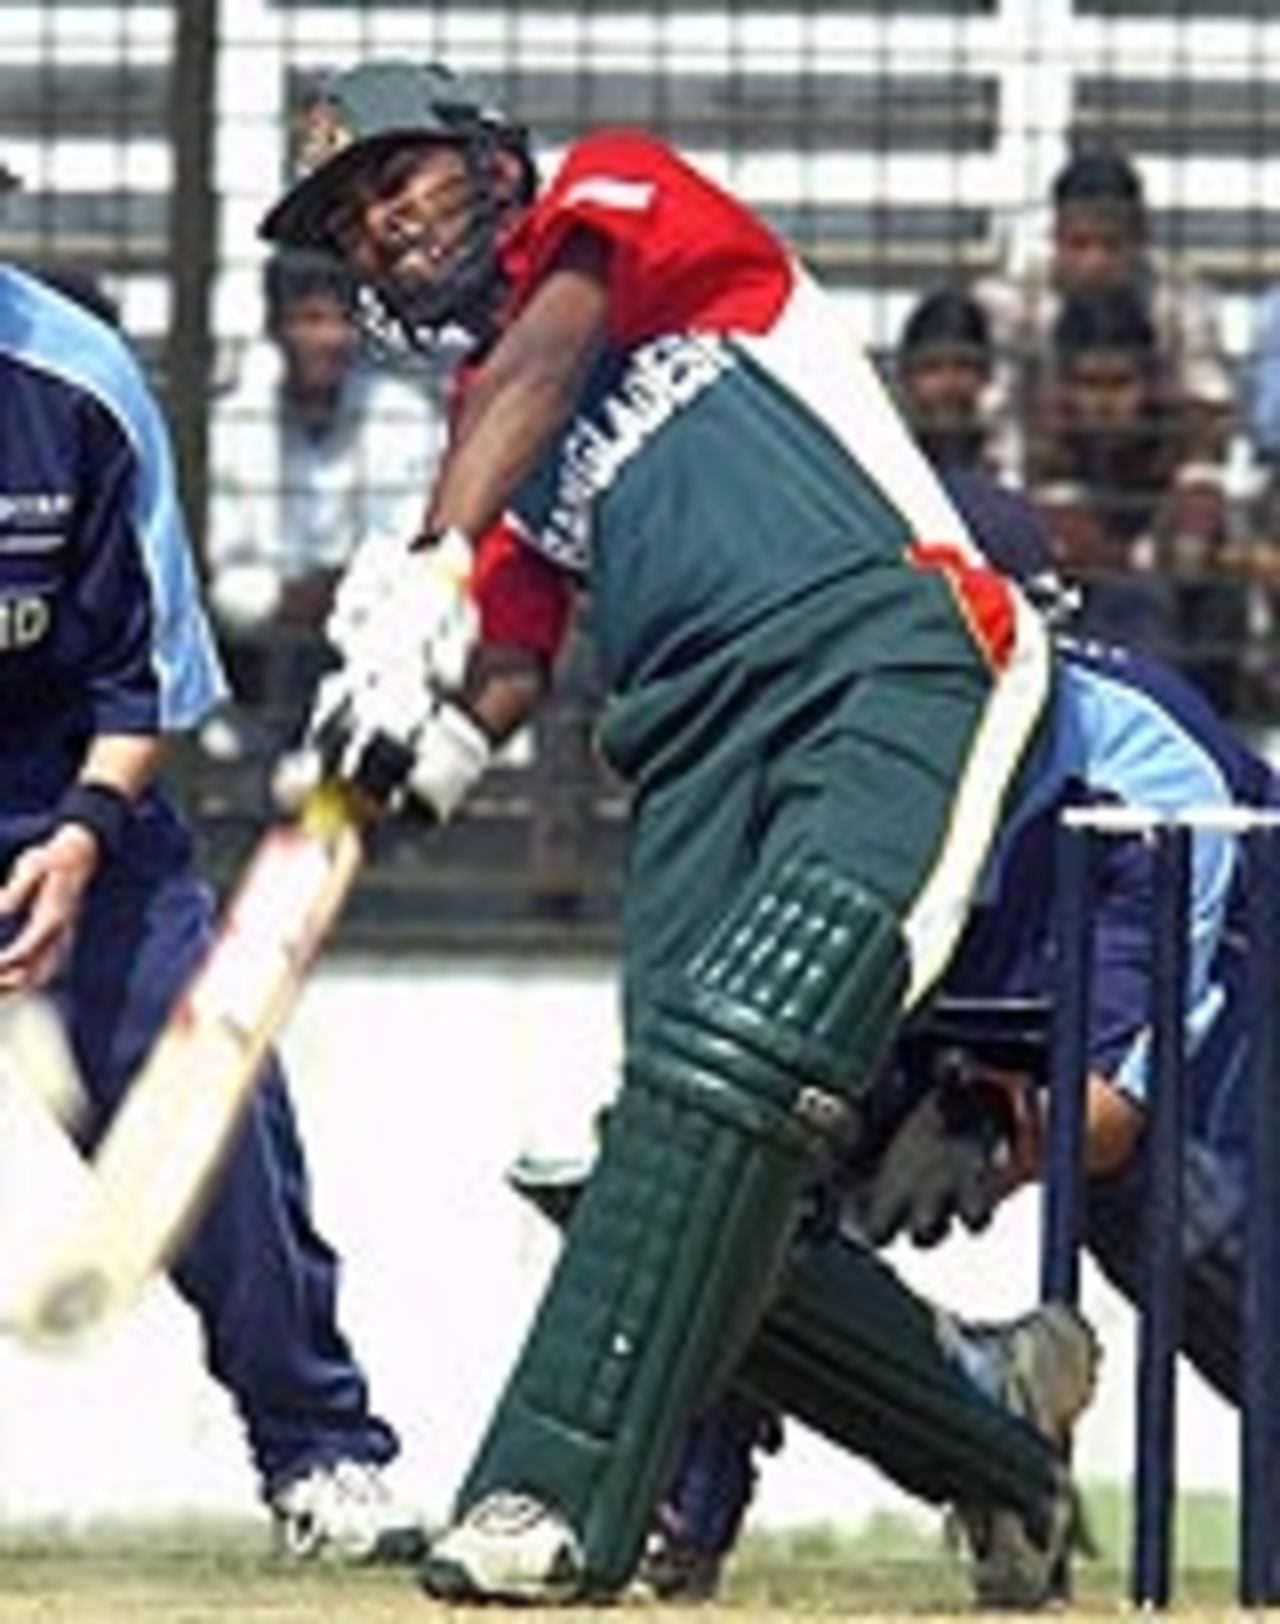 Nafees Ibqal launches one over the top against Scotland U19s, Bdesh v Scotland, U19 World Cup, February 17, 2004